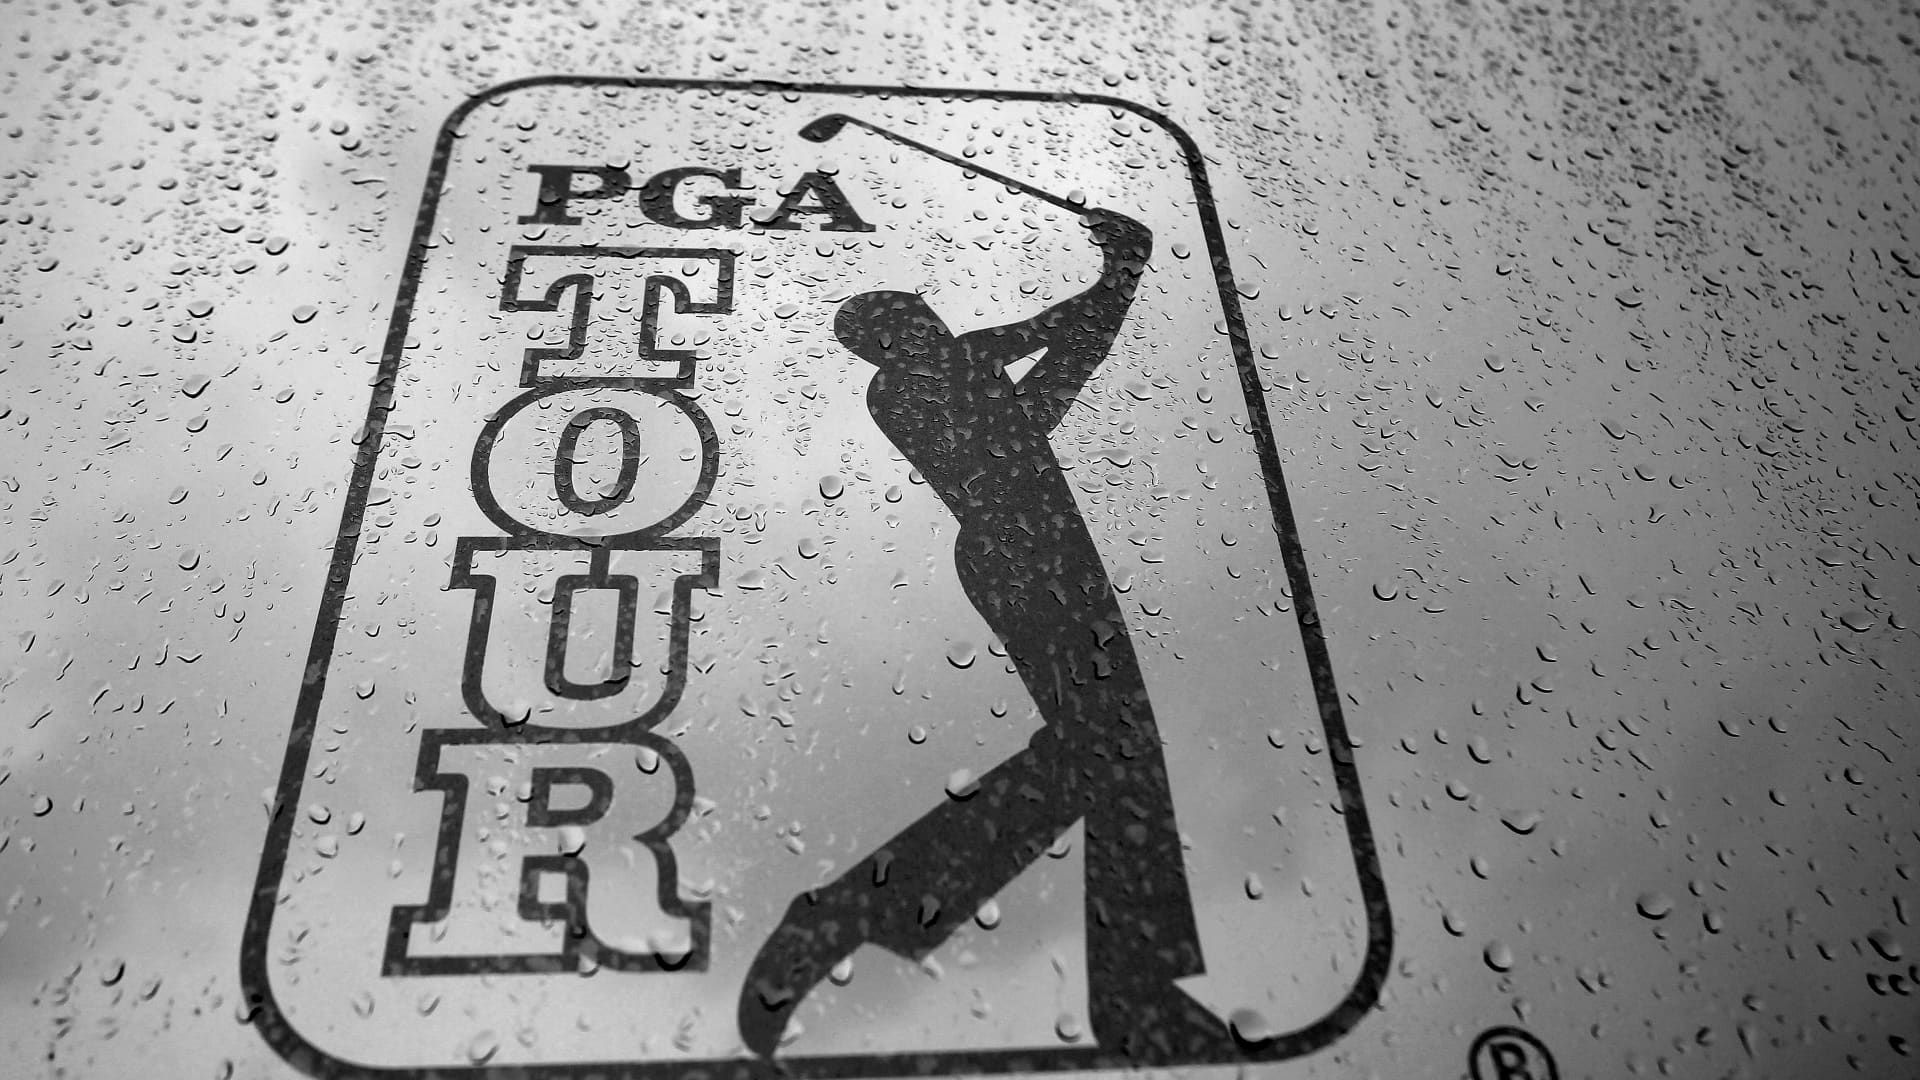 PGA and Saudi Arabia-backed LIV are actively discussing the merger